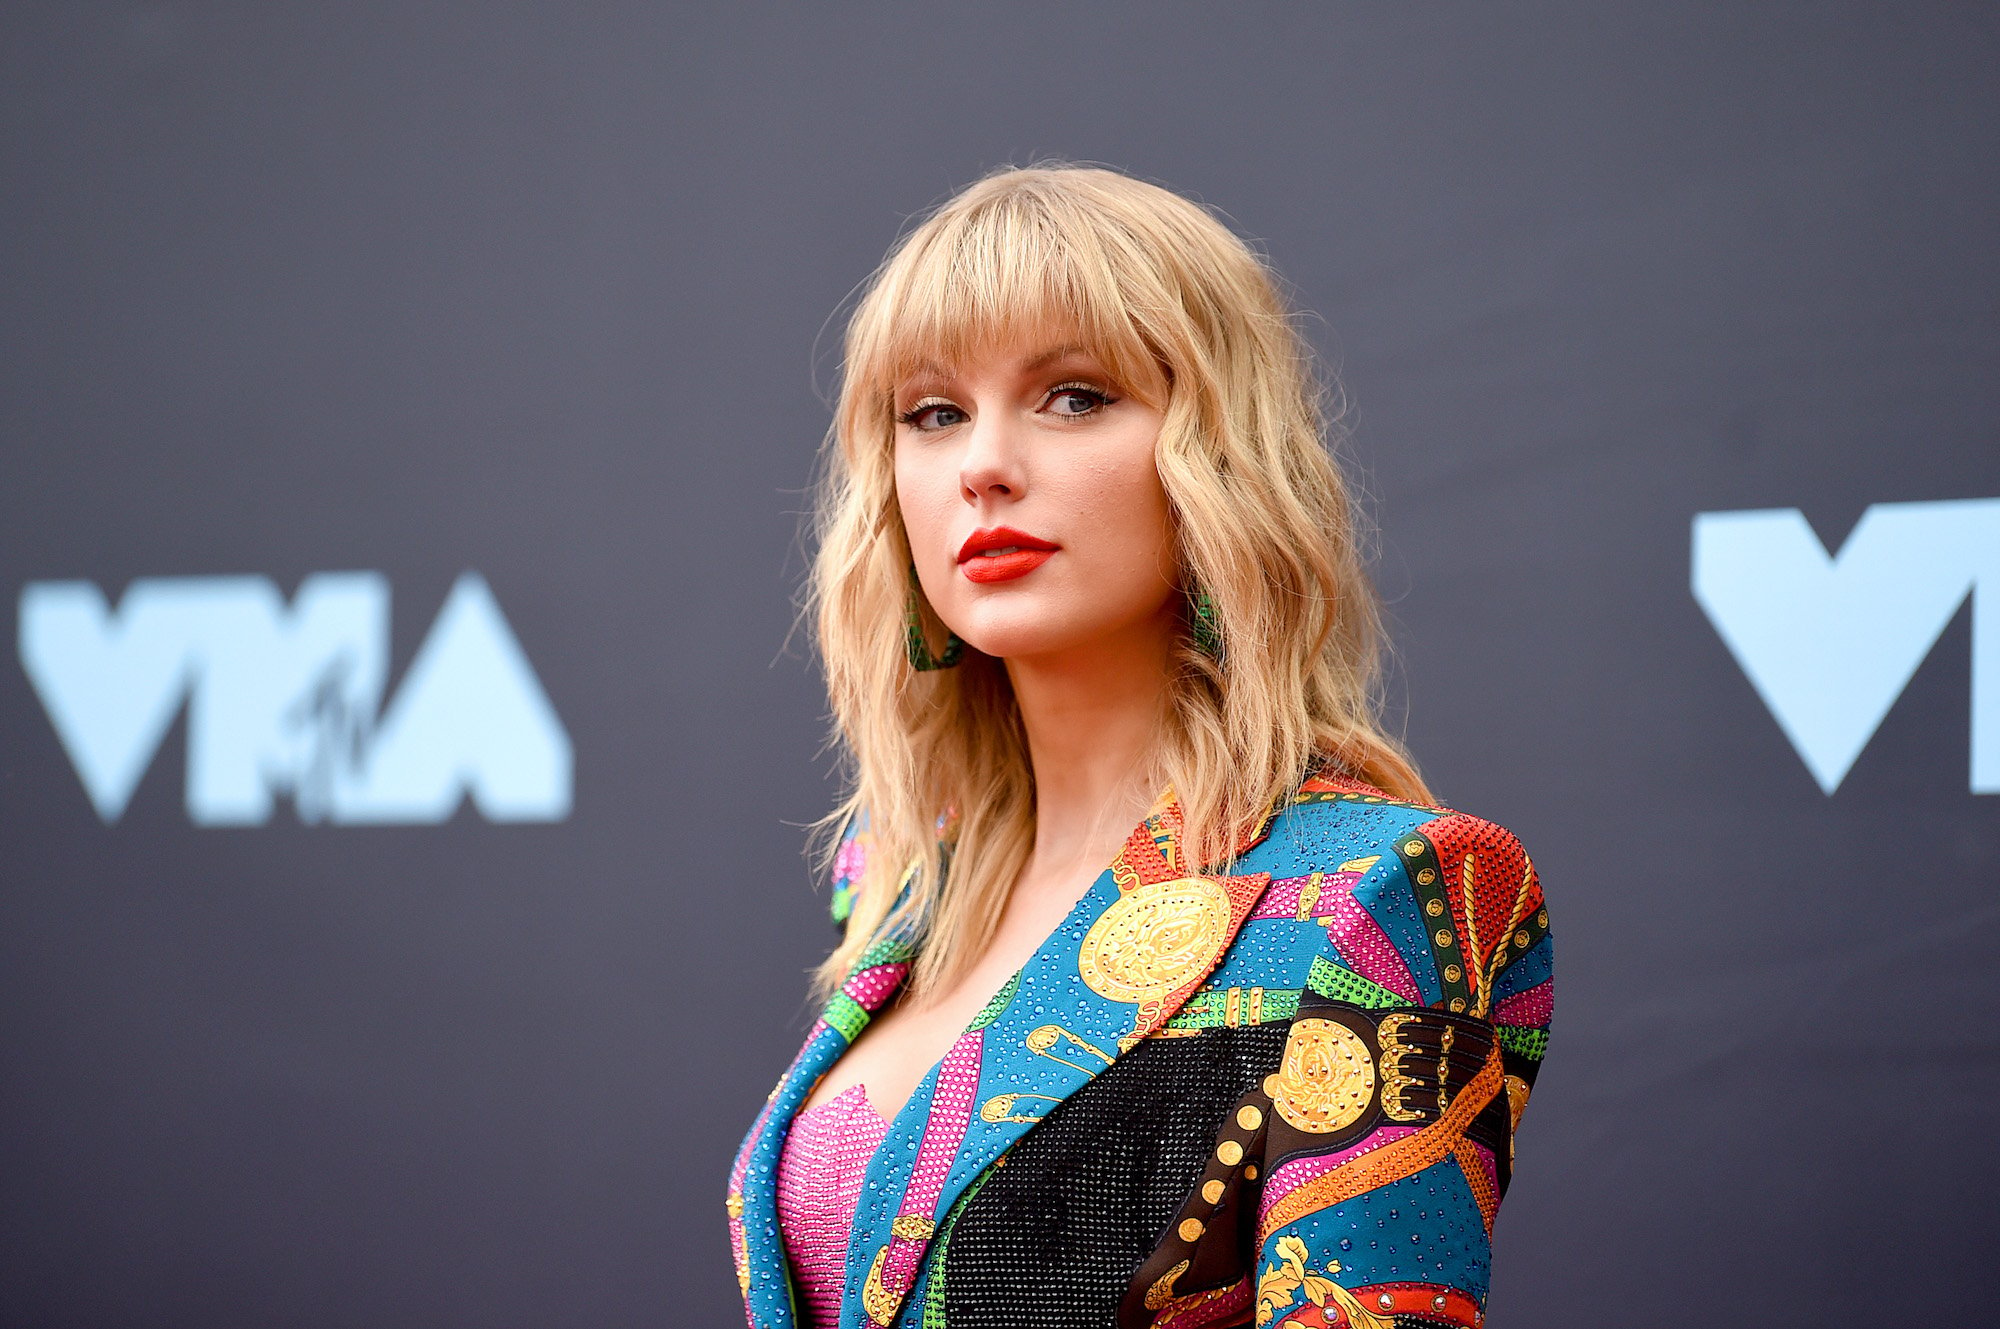 Taylor Swift attends the 2019 MTV Video Music Awards on August 26, 2019 